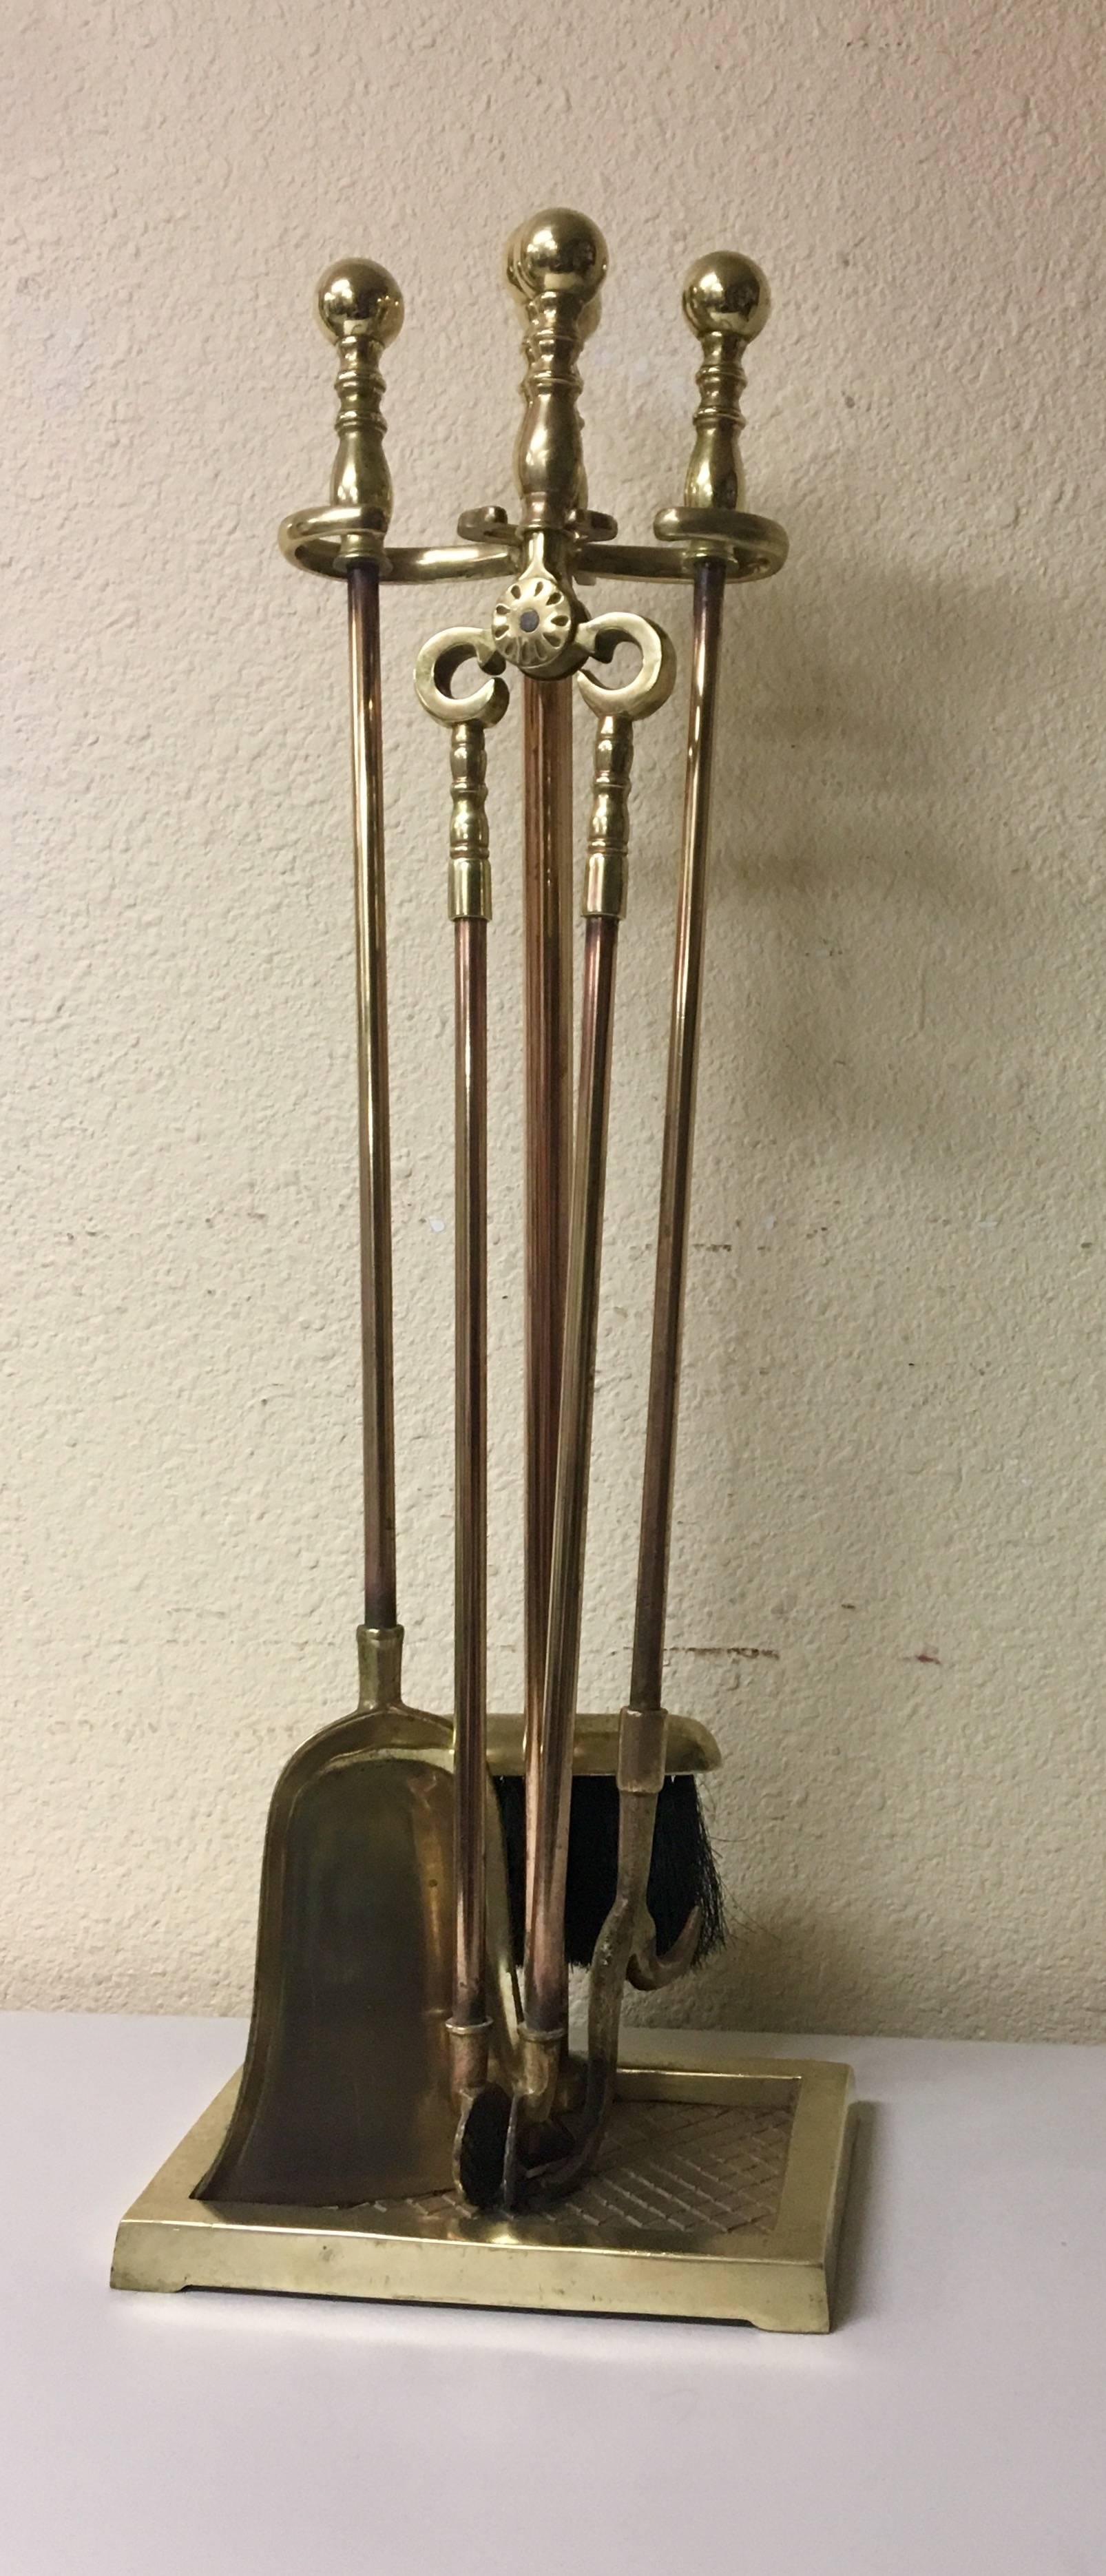 Elegant polished solid brass fireplace tools set with rose and gold brass finish. Very heavy and wonderful quality a great, sophisticated look!